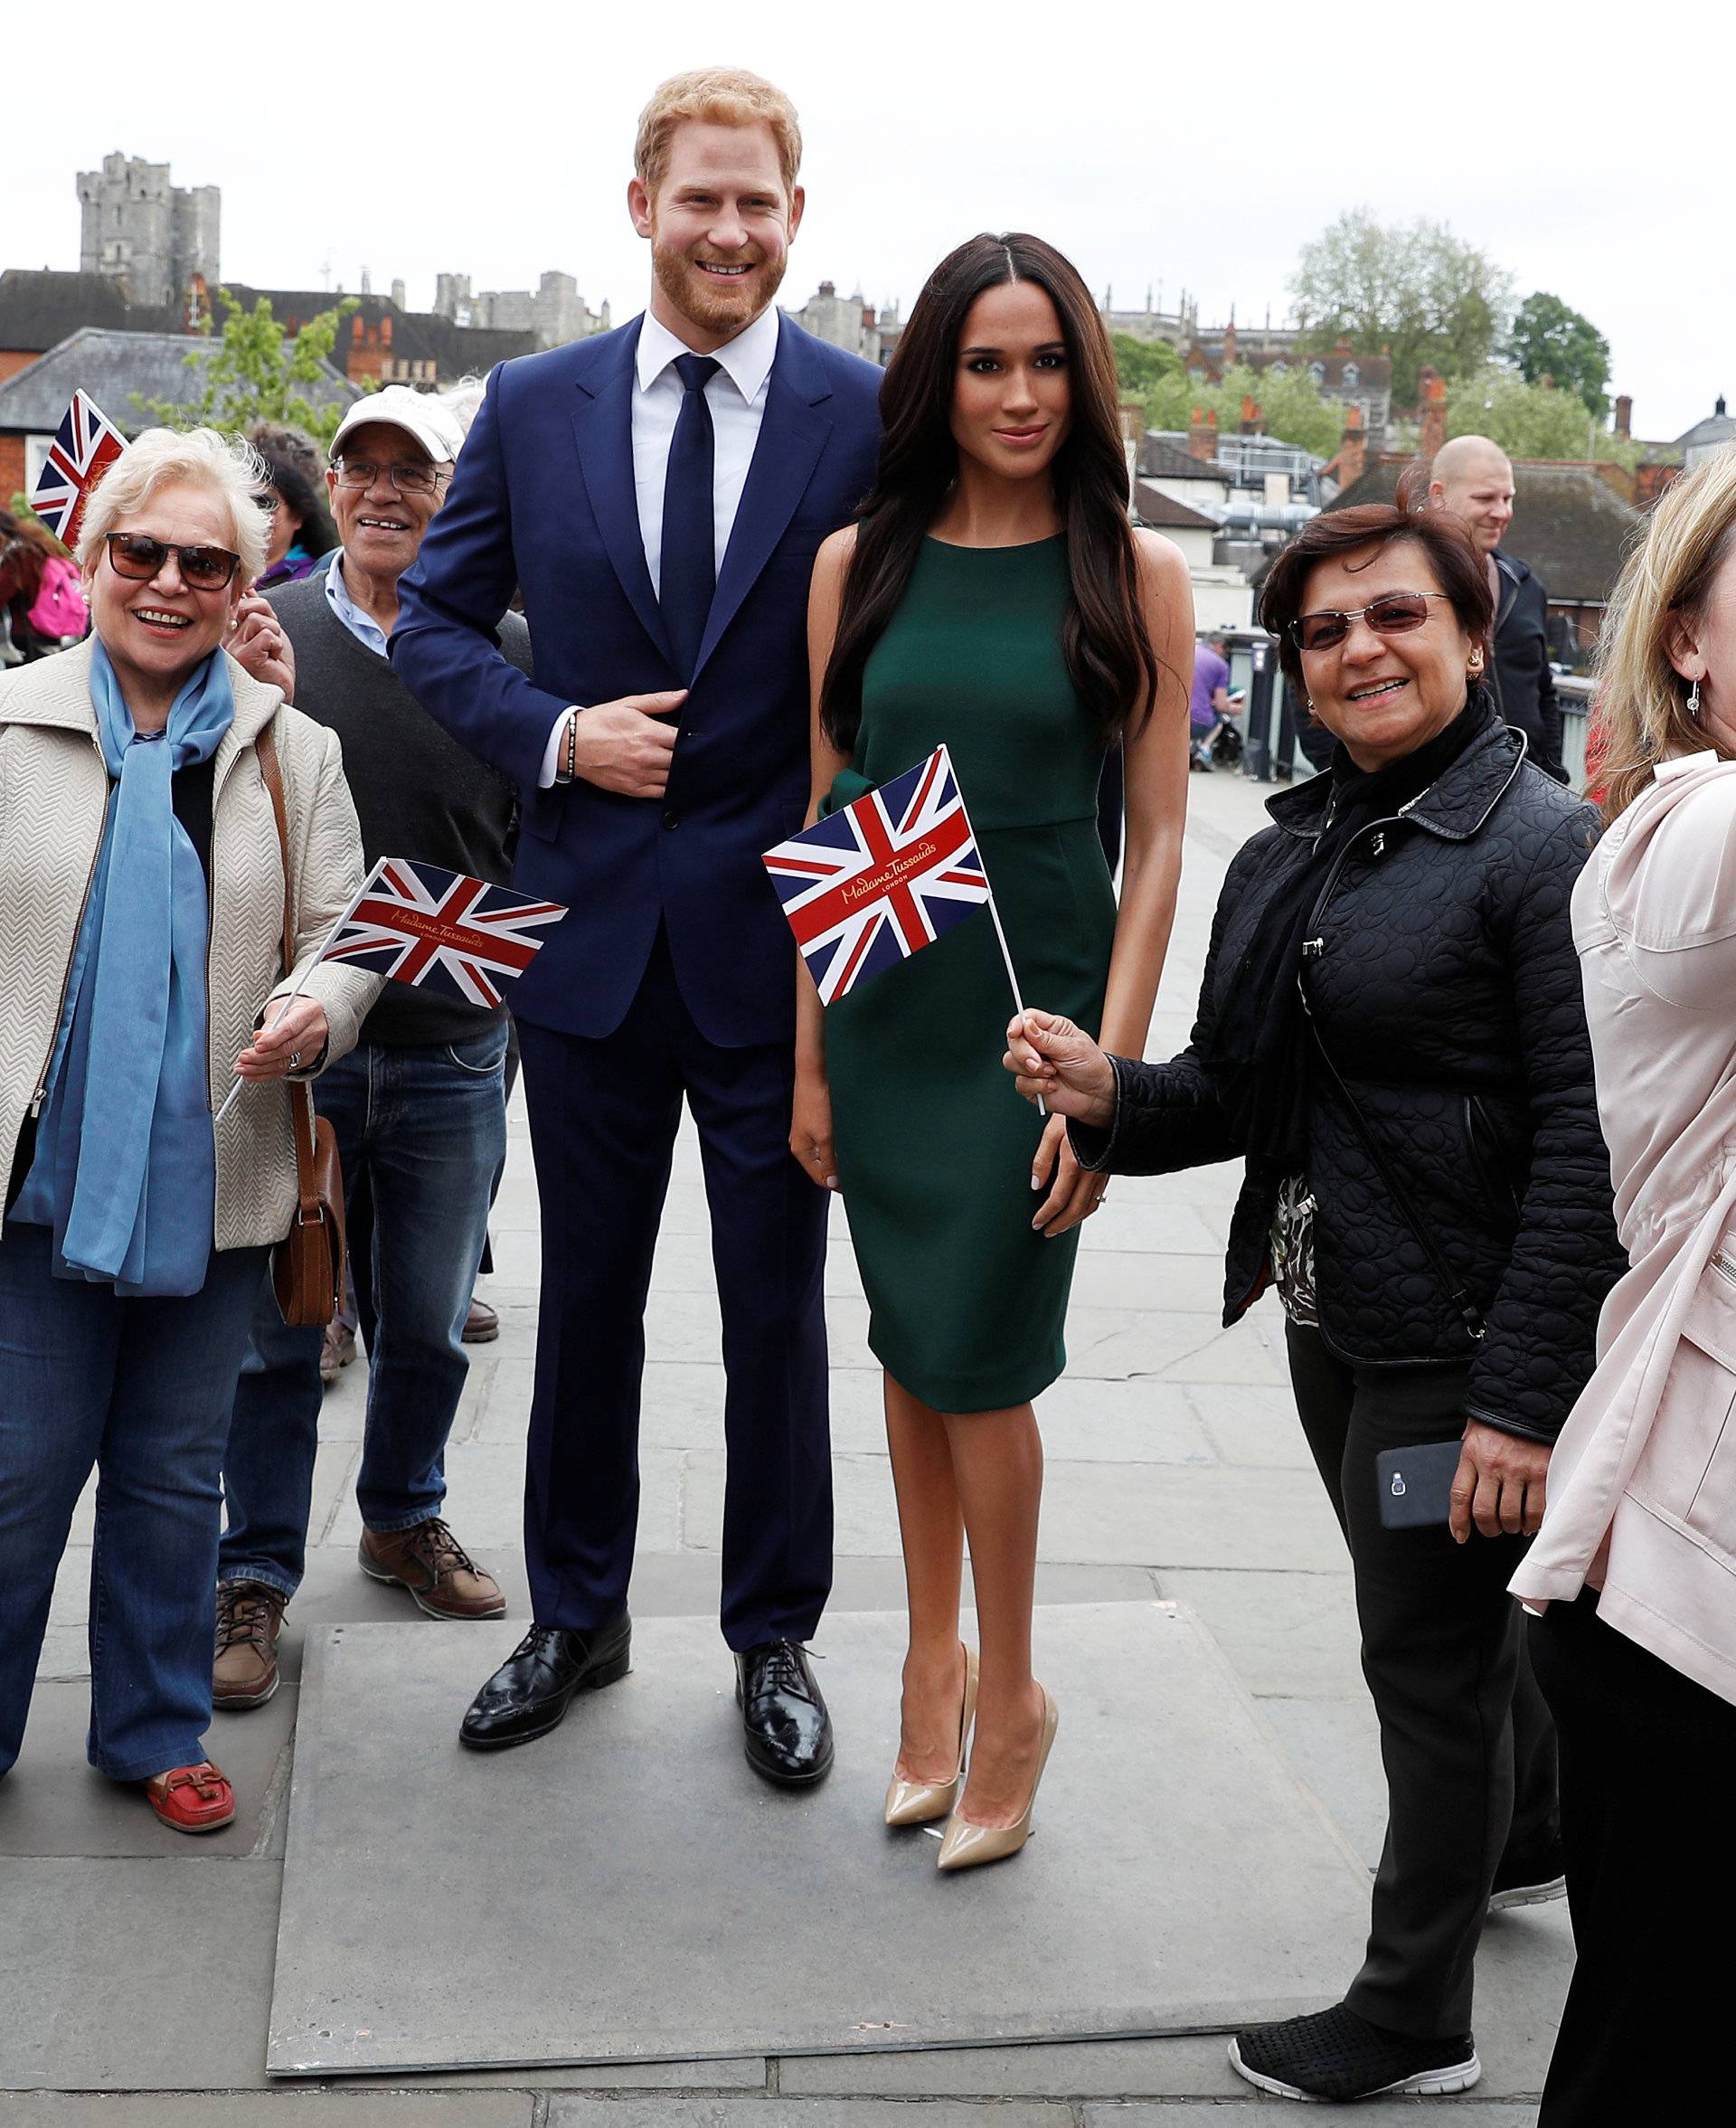 People pose for pictures and selfies with models of Britain's Prince Harry and Meghan Markle ahead of their wedding, in Windsor